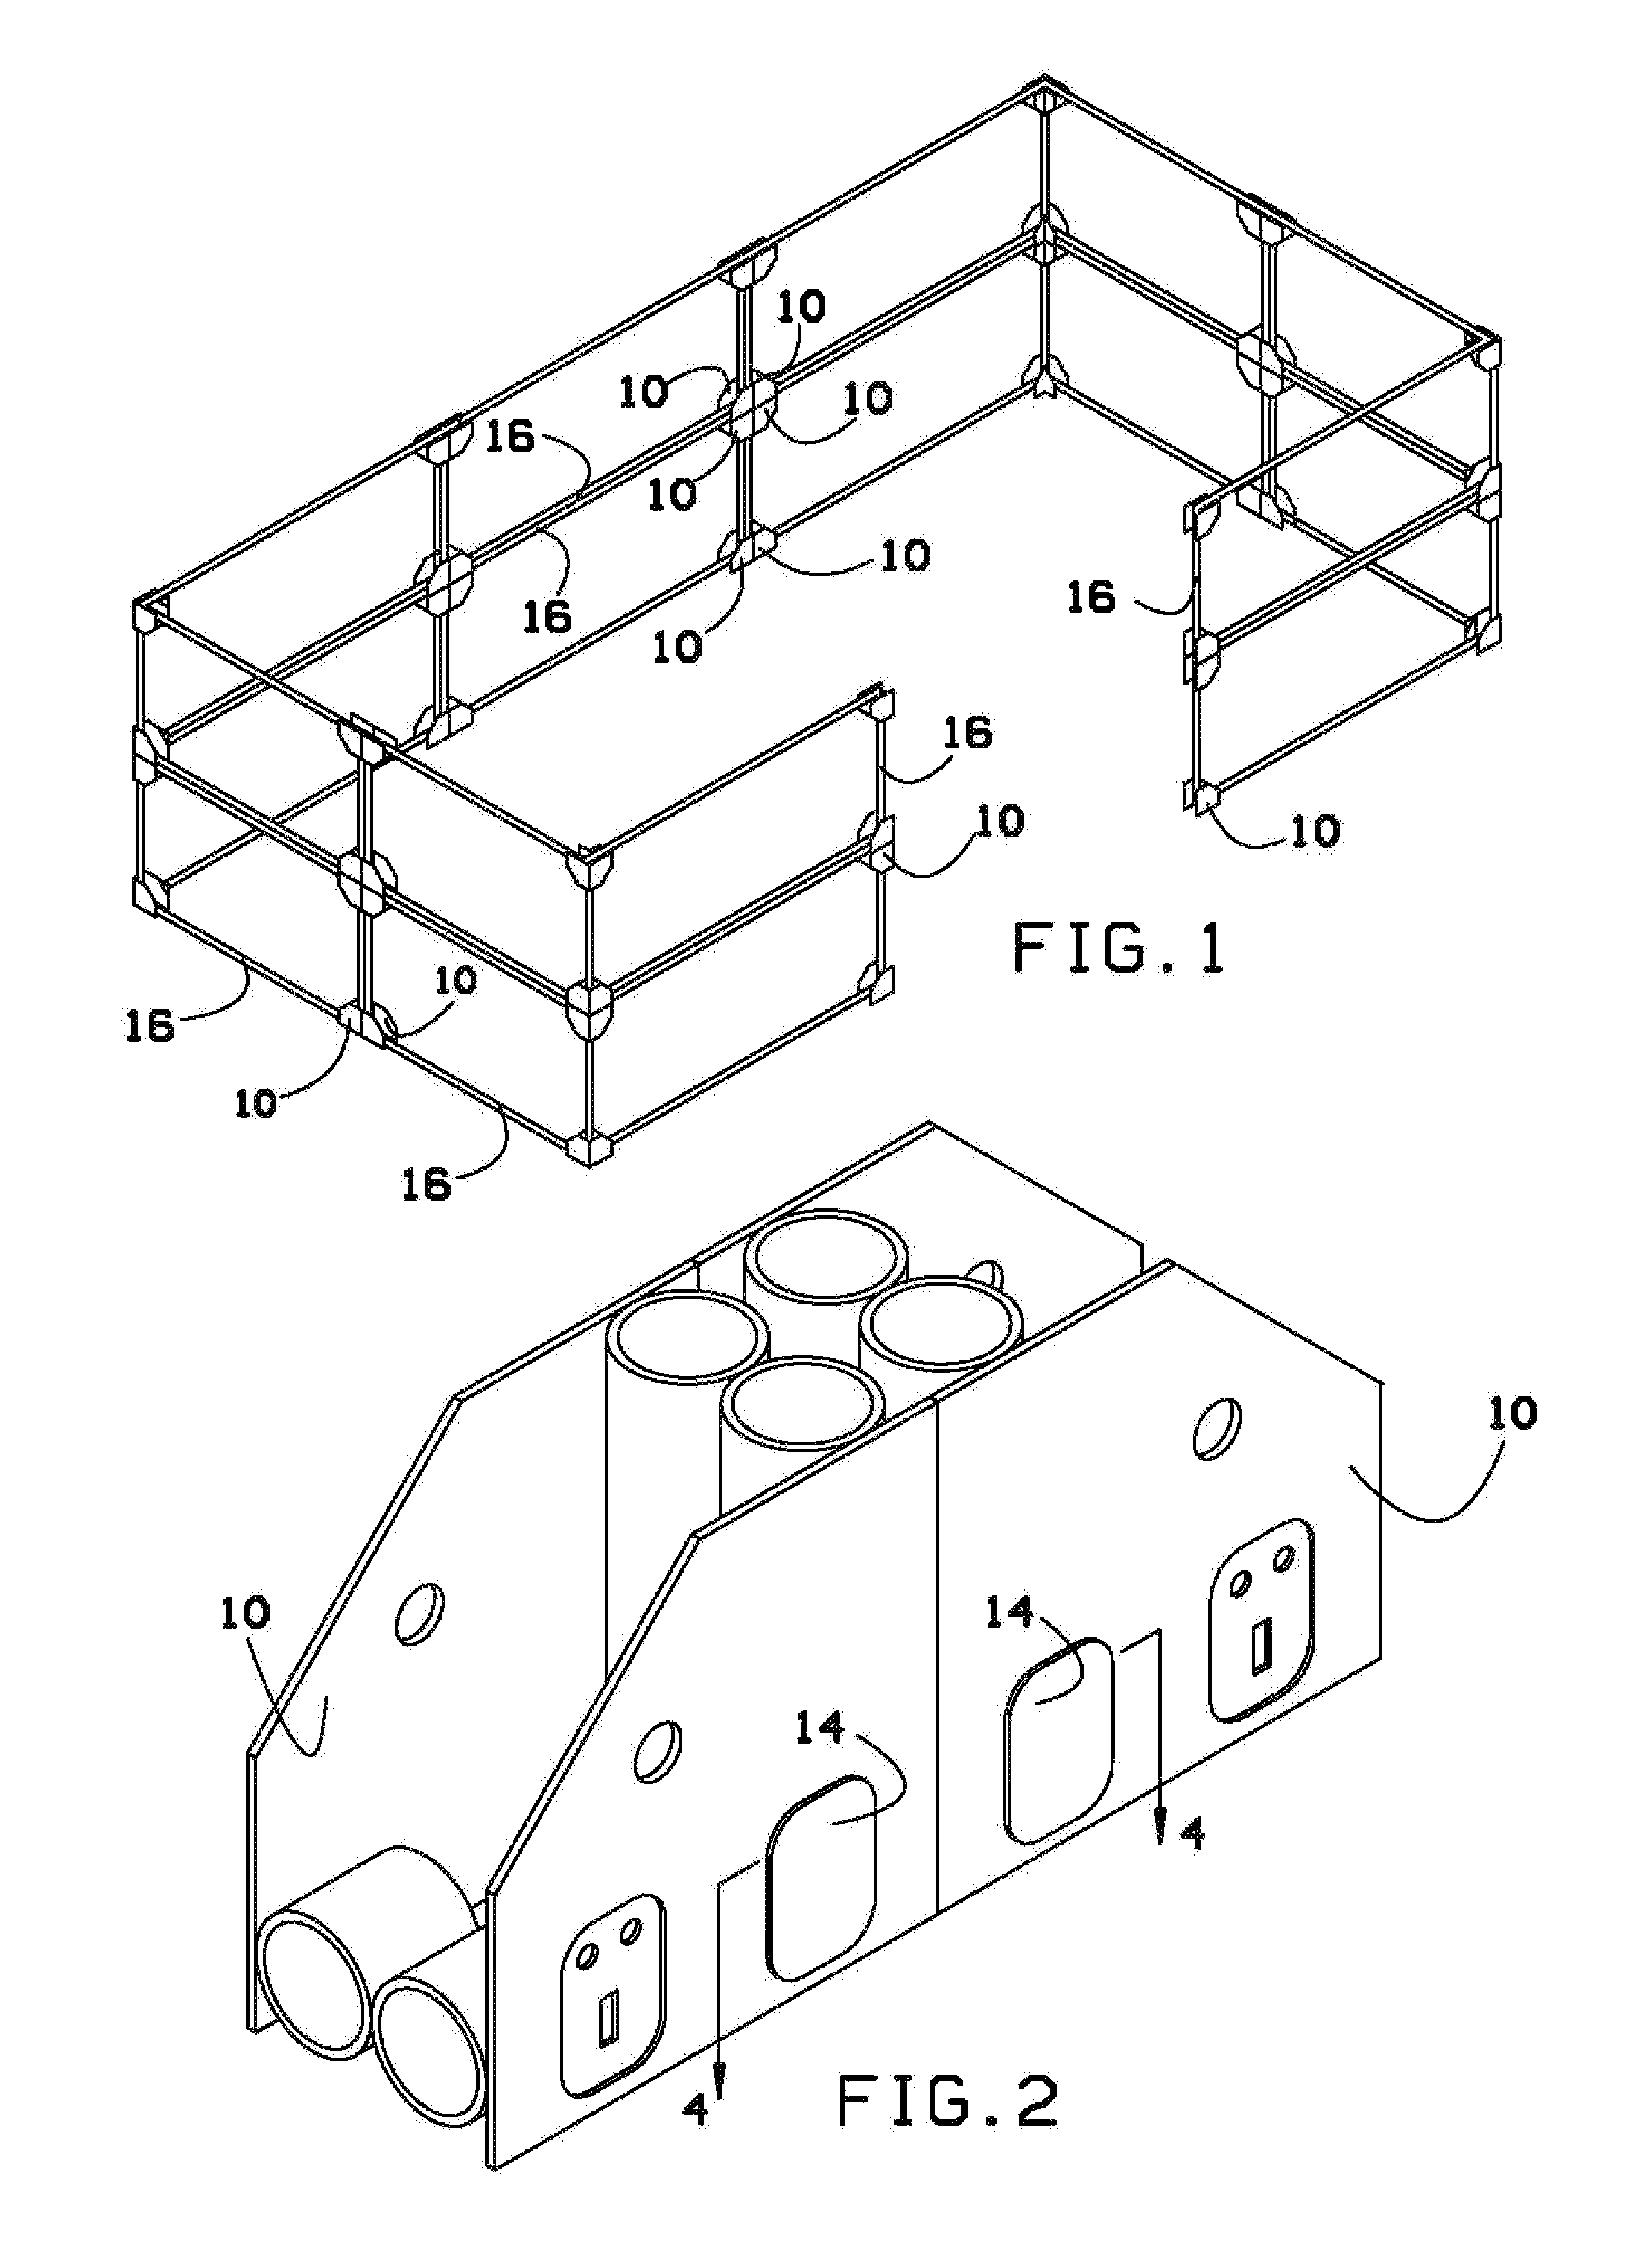 Interlocking joint system for emergency structures